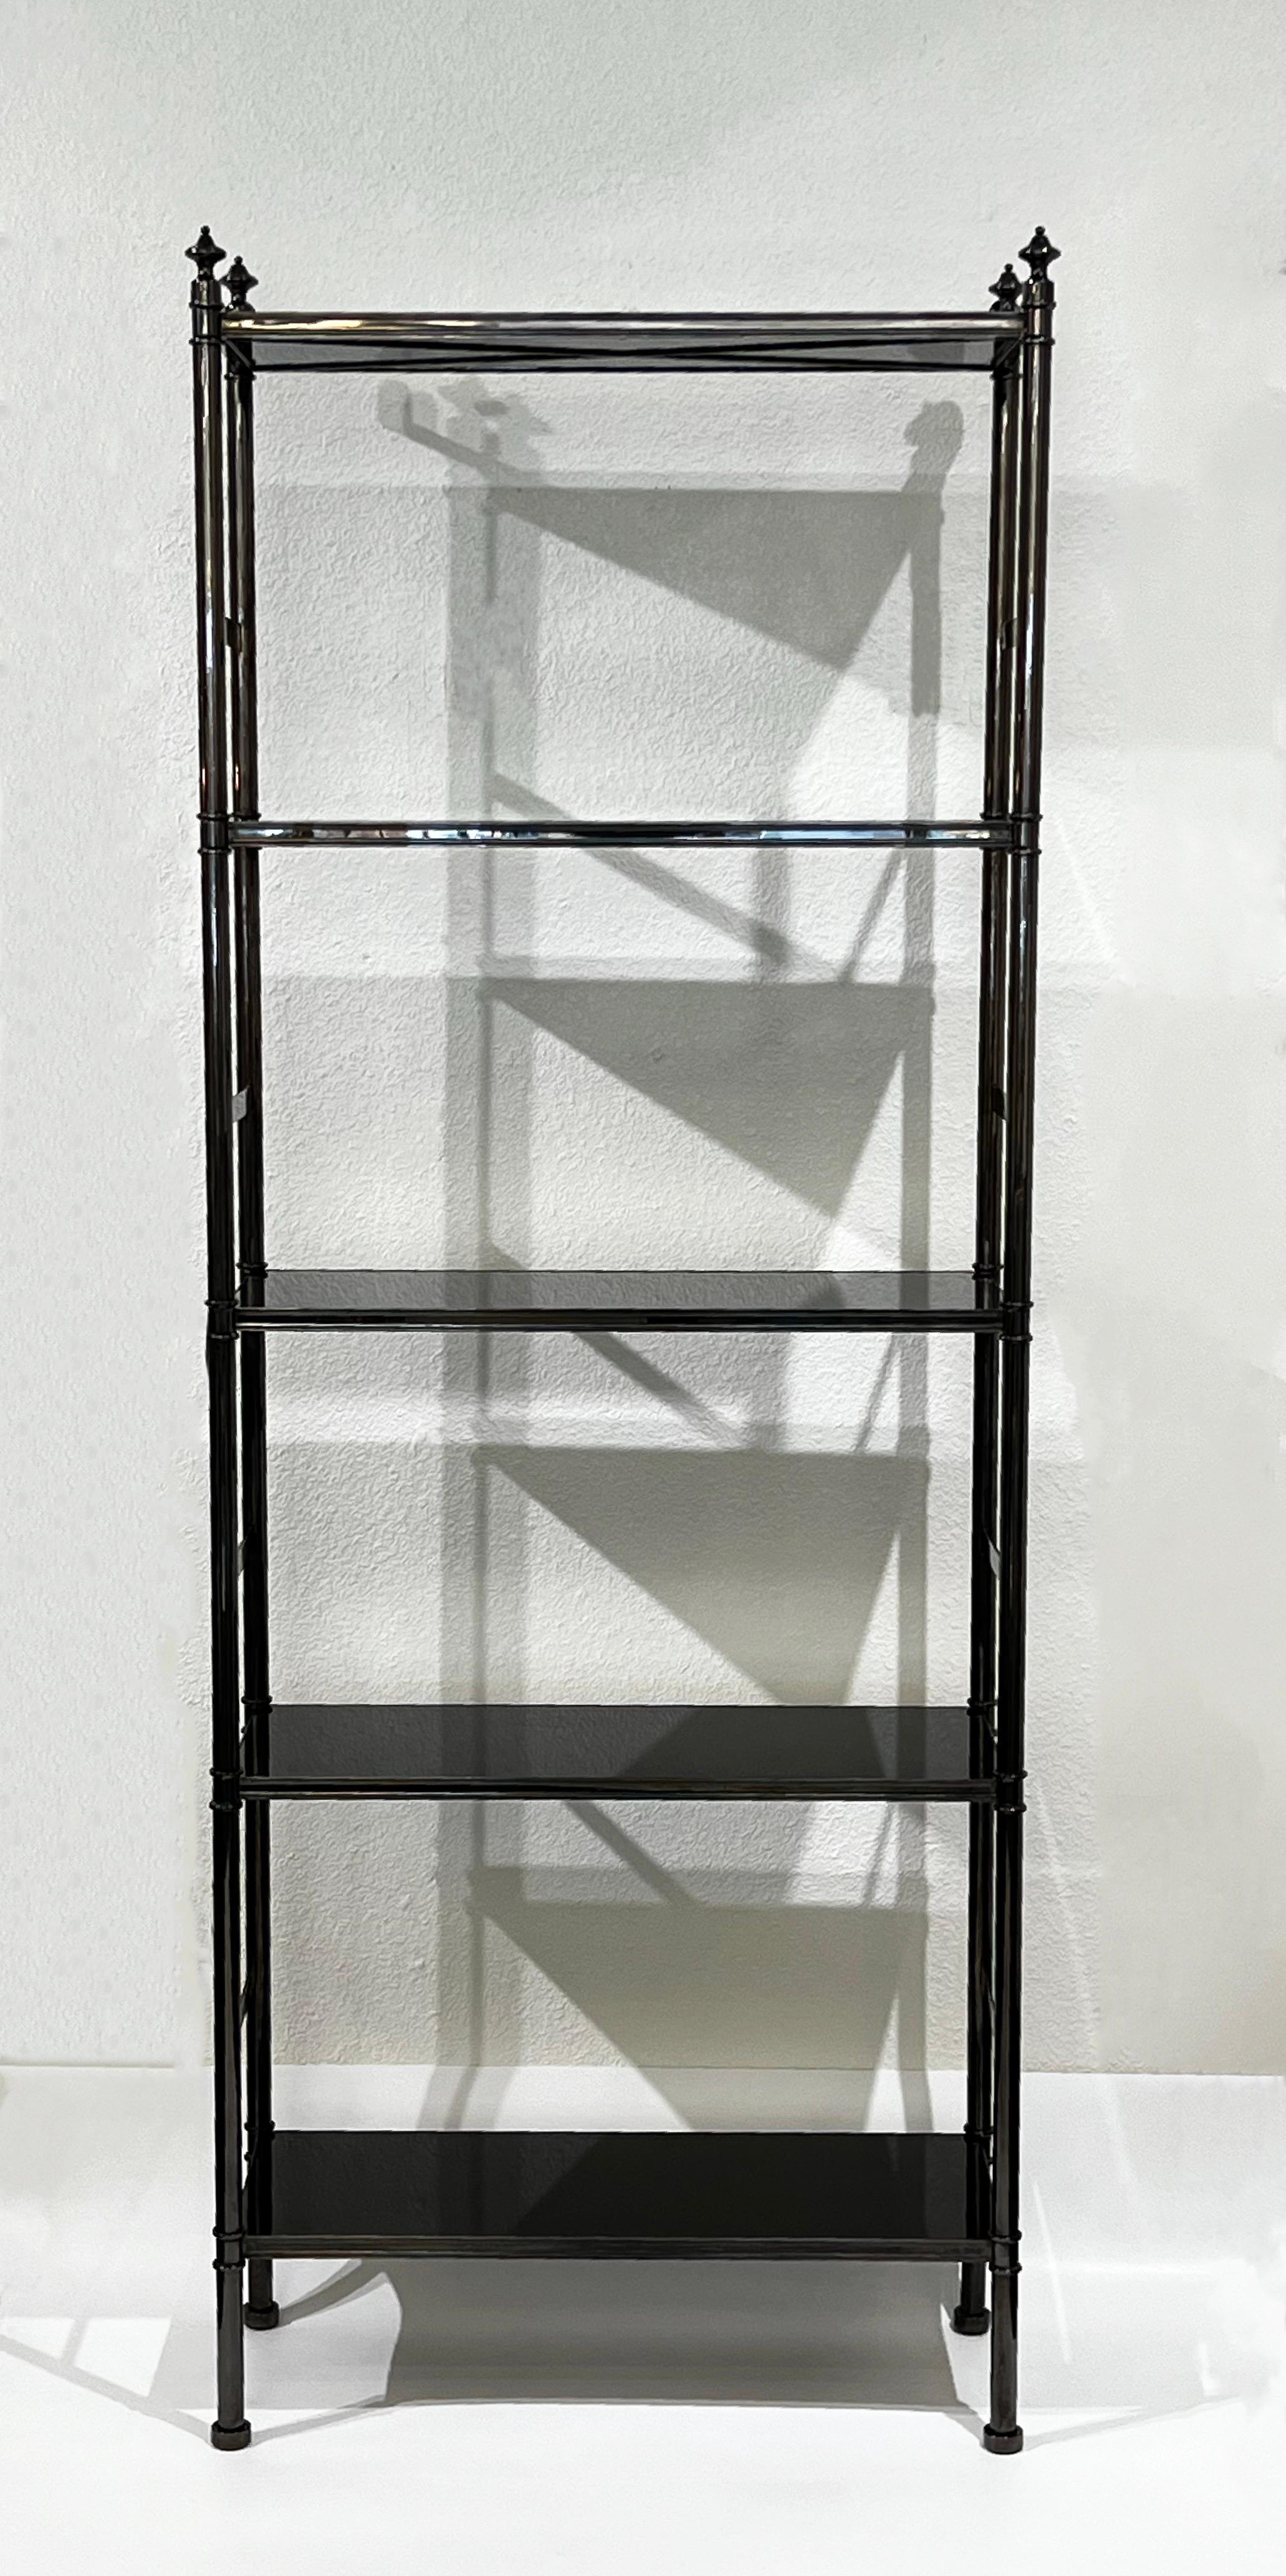 Rare 1970’s ‘Cole Porter Etagere’ or bookcase by Karl Springer. 
Constructed of metal with a polish gunmetal finish and black lacquered shelfs. 
It’s designed with adjustable brackets to anchor to wall, they can be removed if desired. 

It’s in